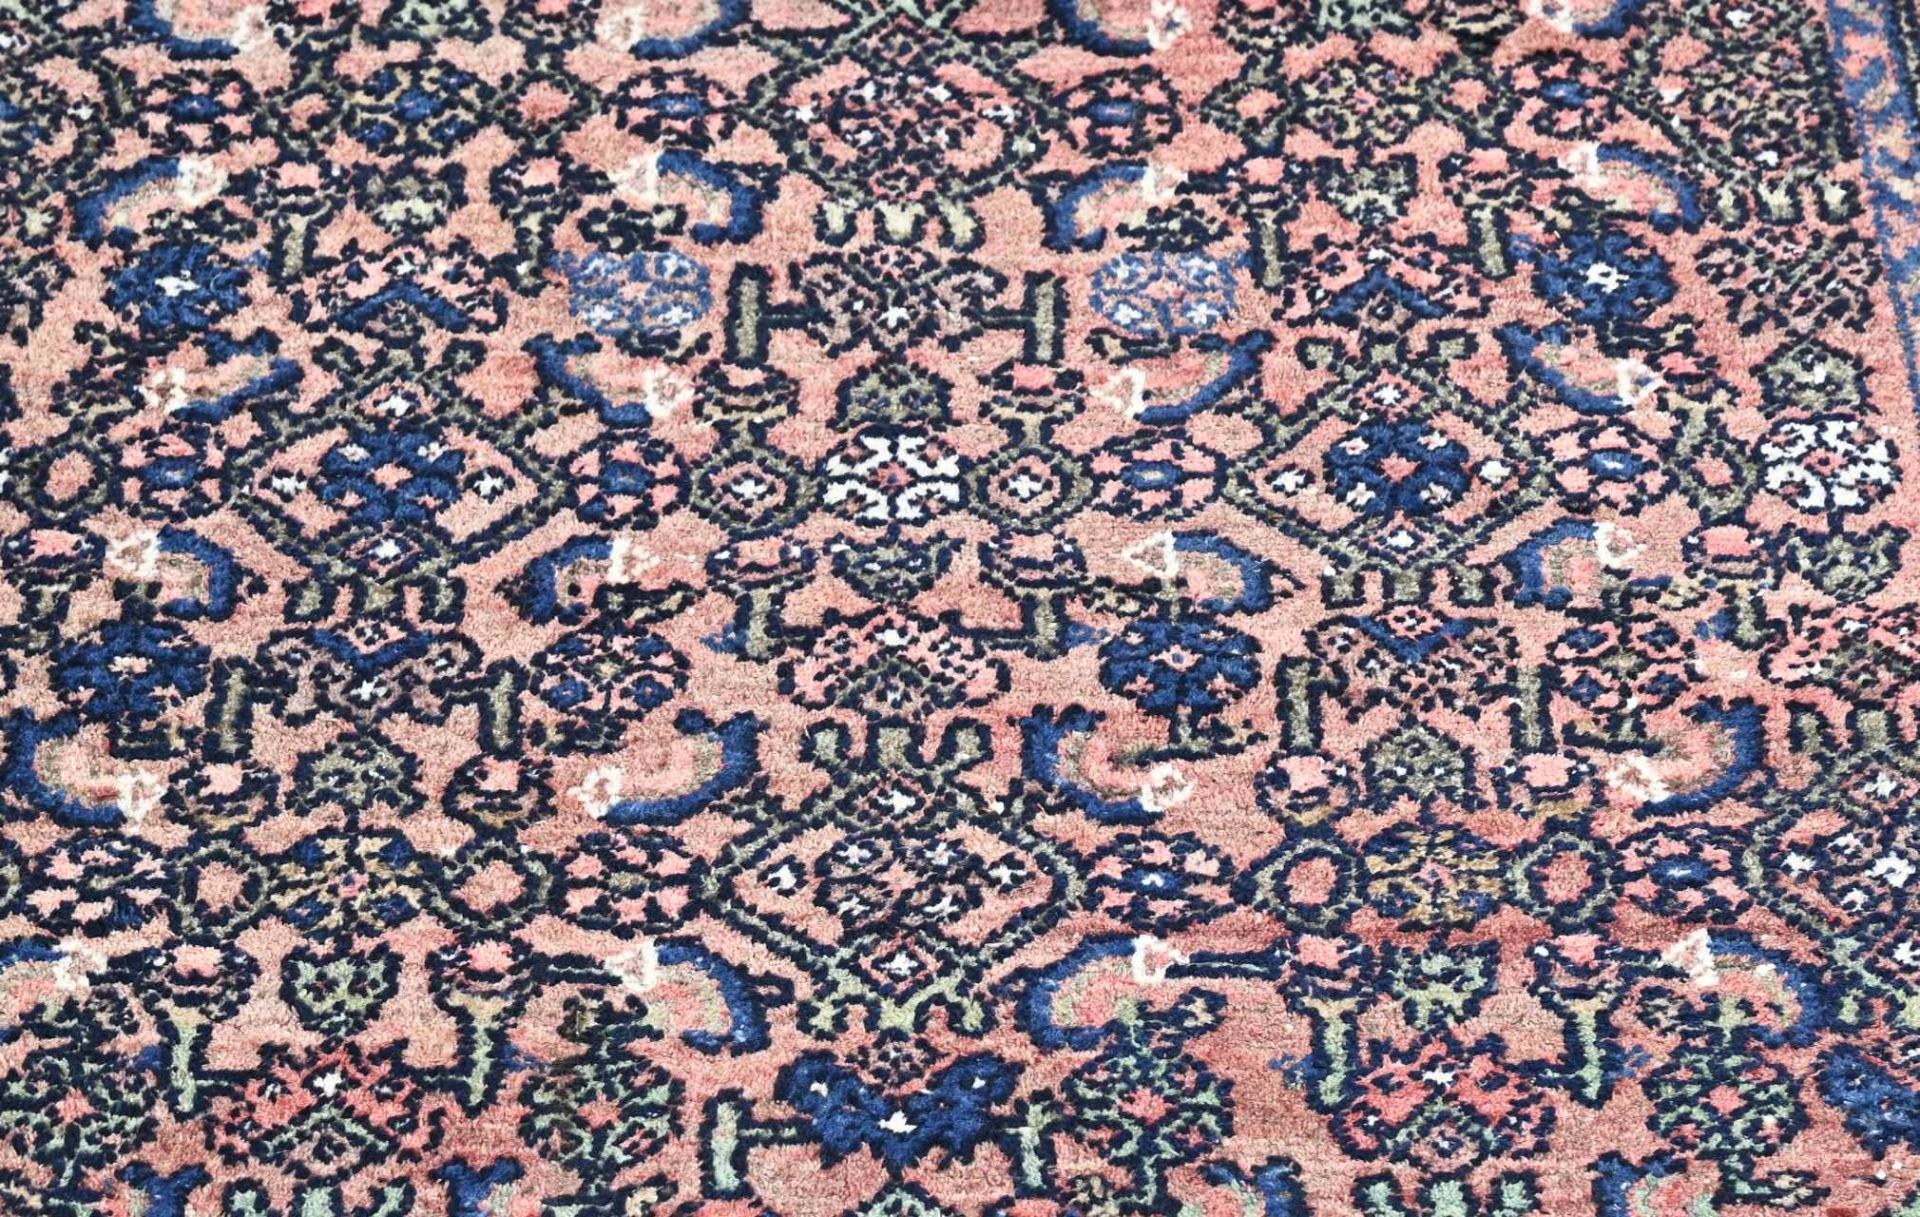 Hand-knotted Persian carpet, 180 x 106 cm. - Image 2 of 3